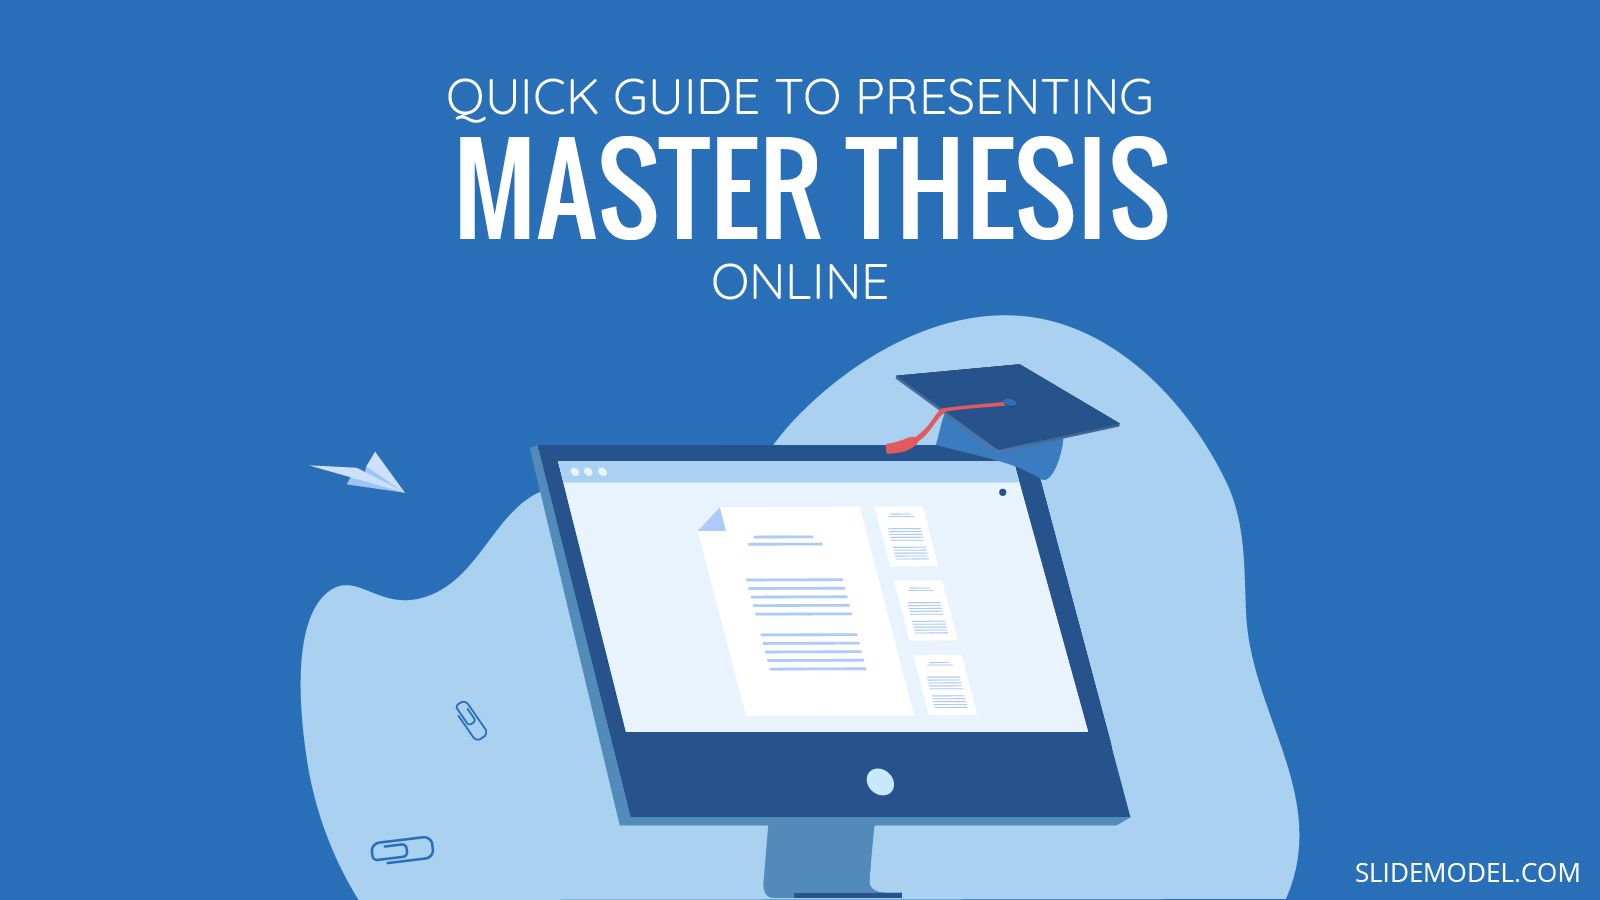 can i publish my master thesis in a journal